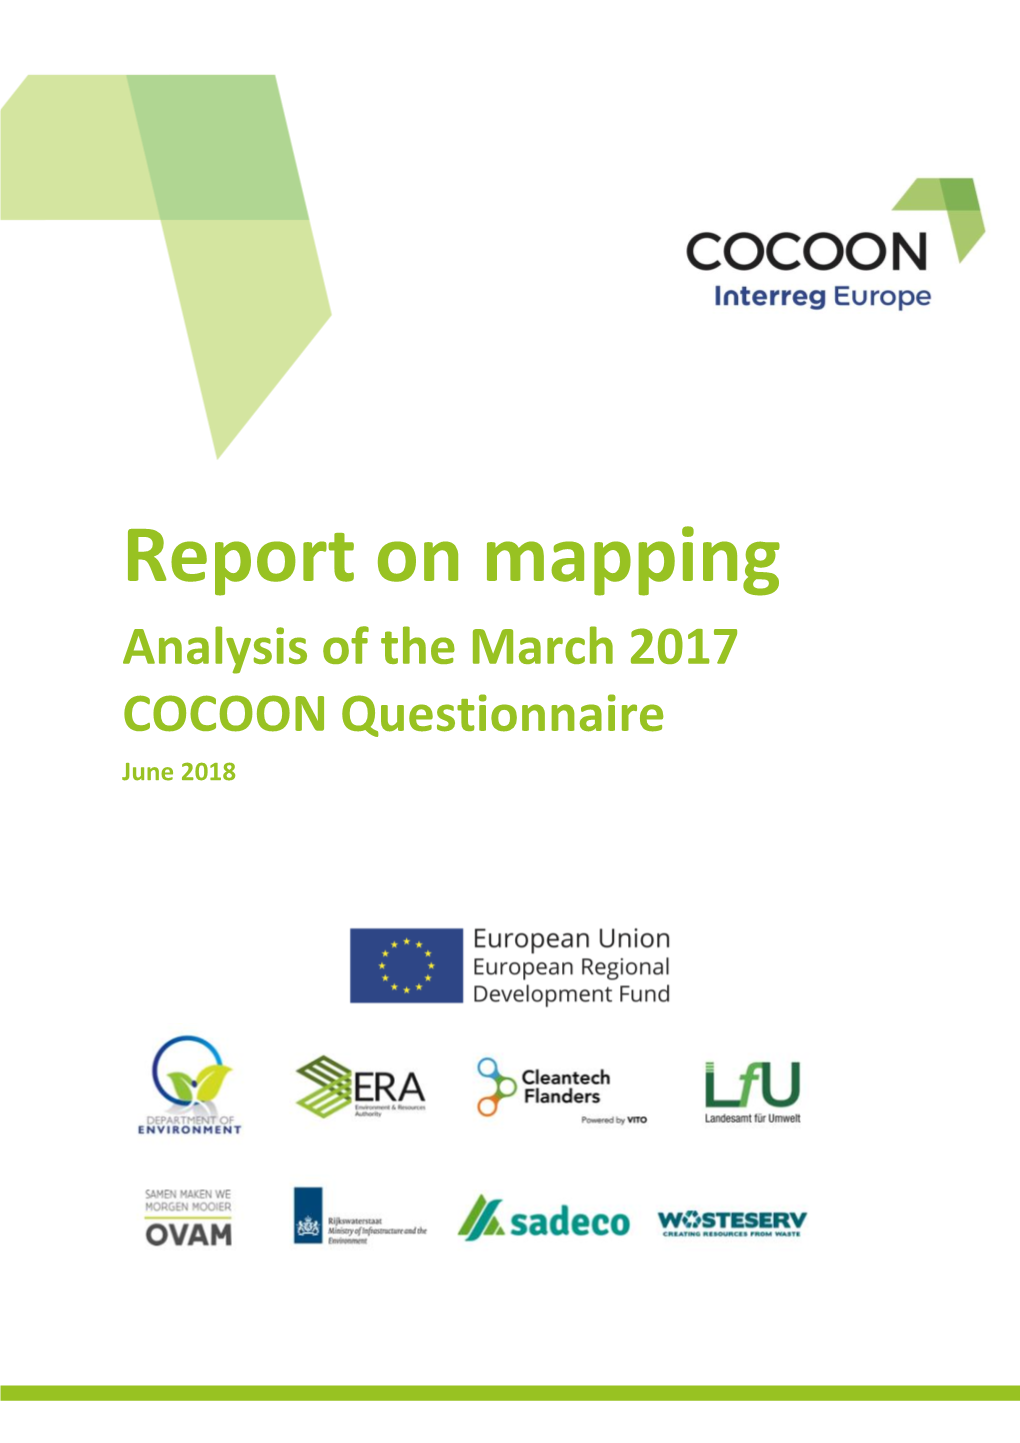 Report on Mapping Analysis of the March 2017 COCOON Questionnaire June 2018